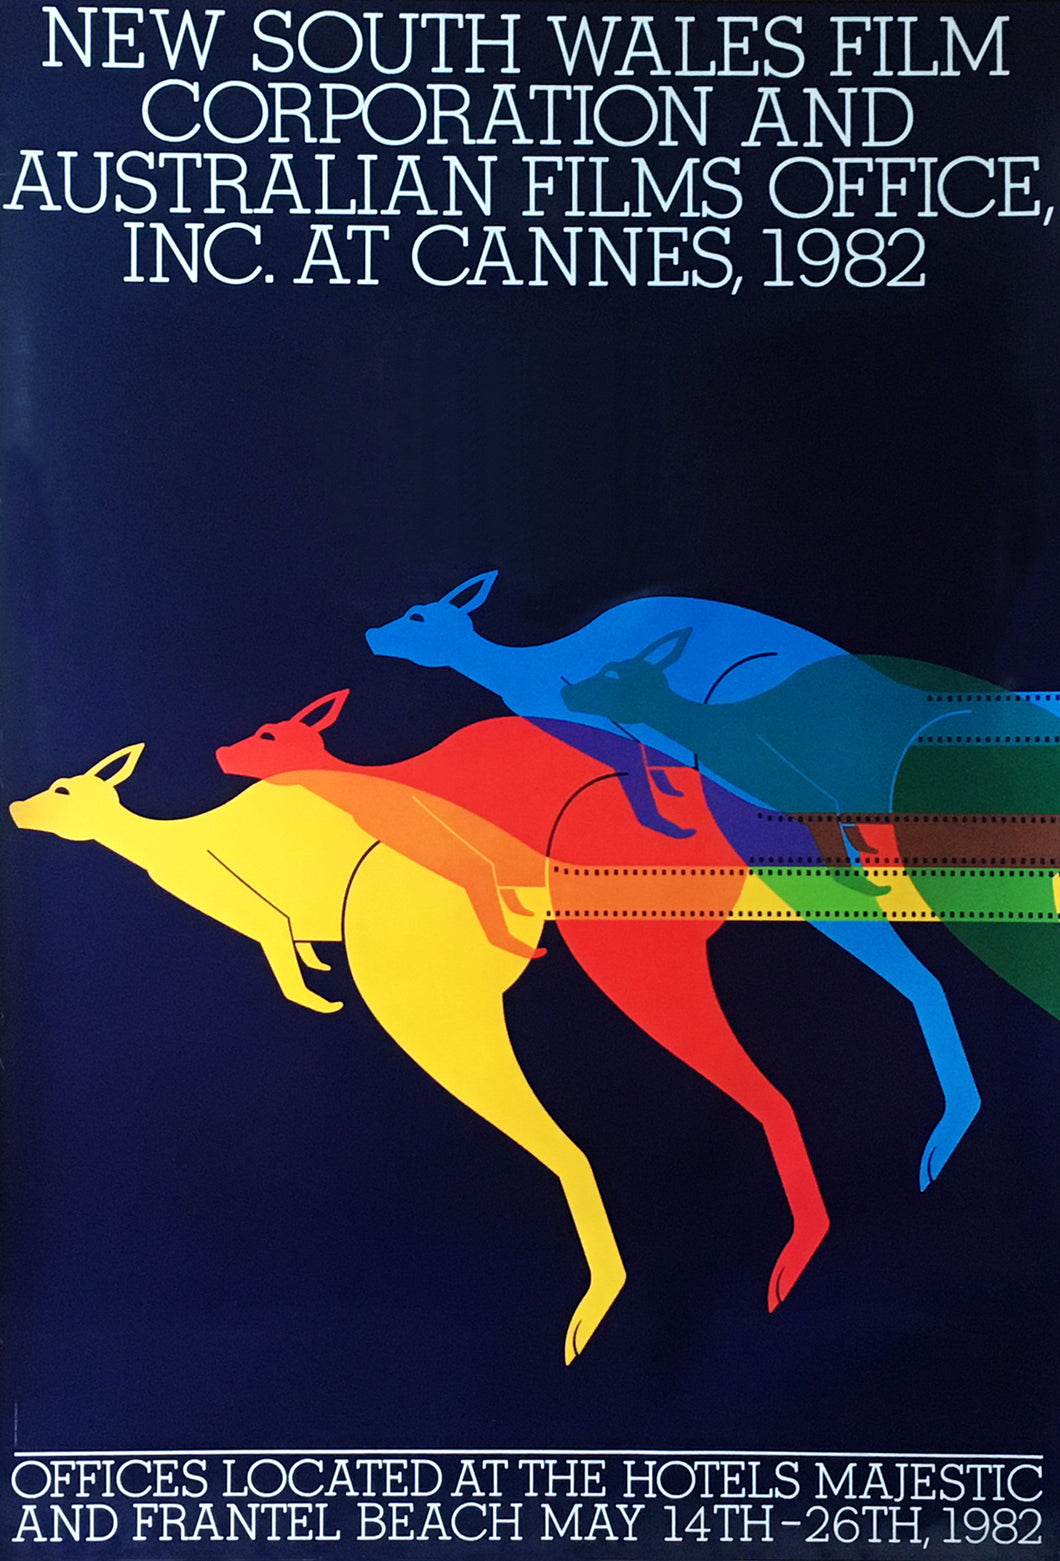 New South Wales Film Corporation At Cannes 1982